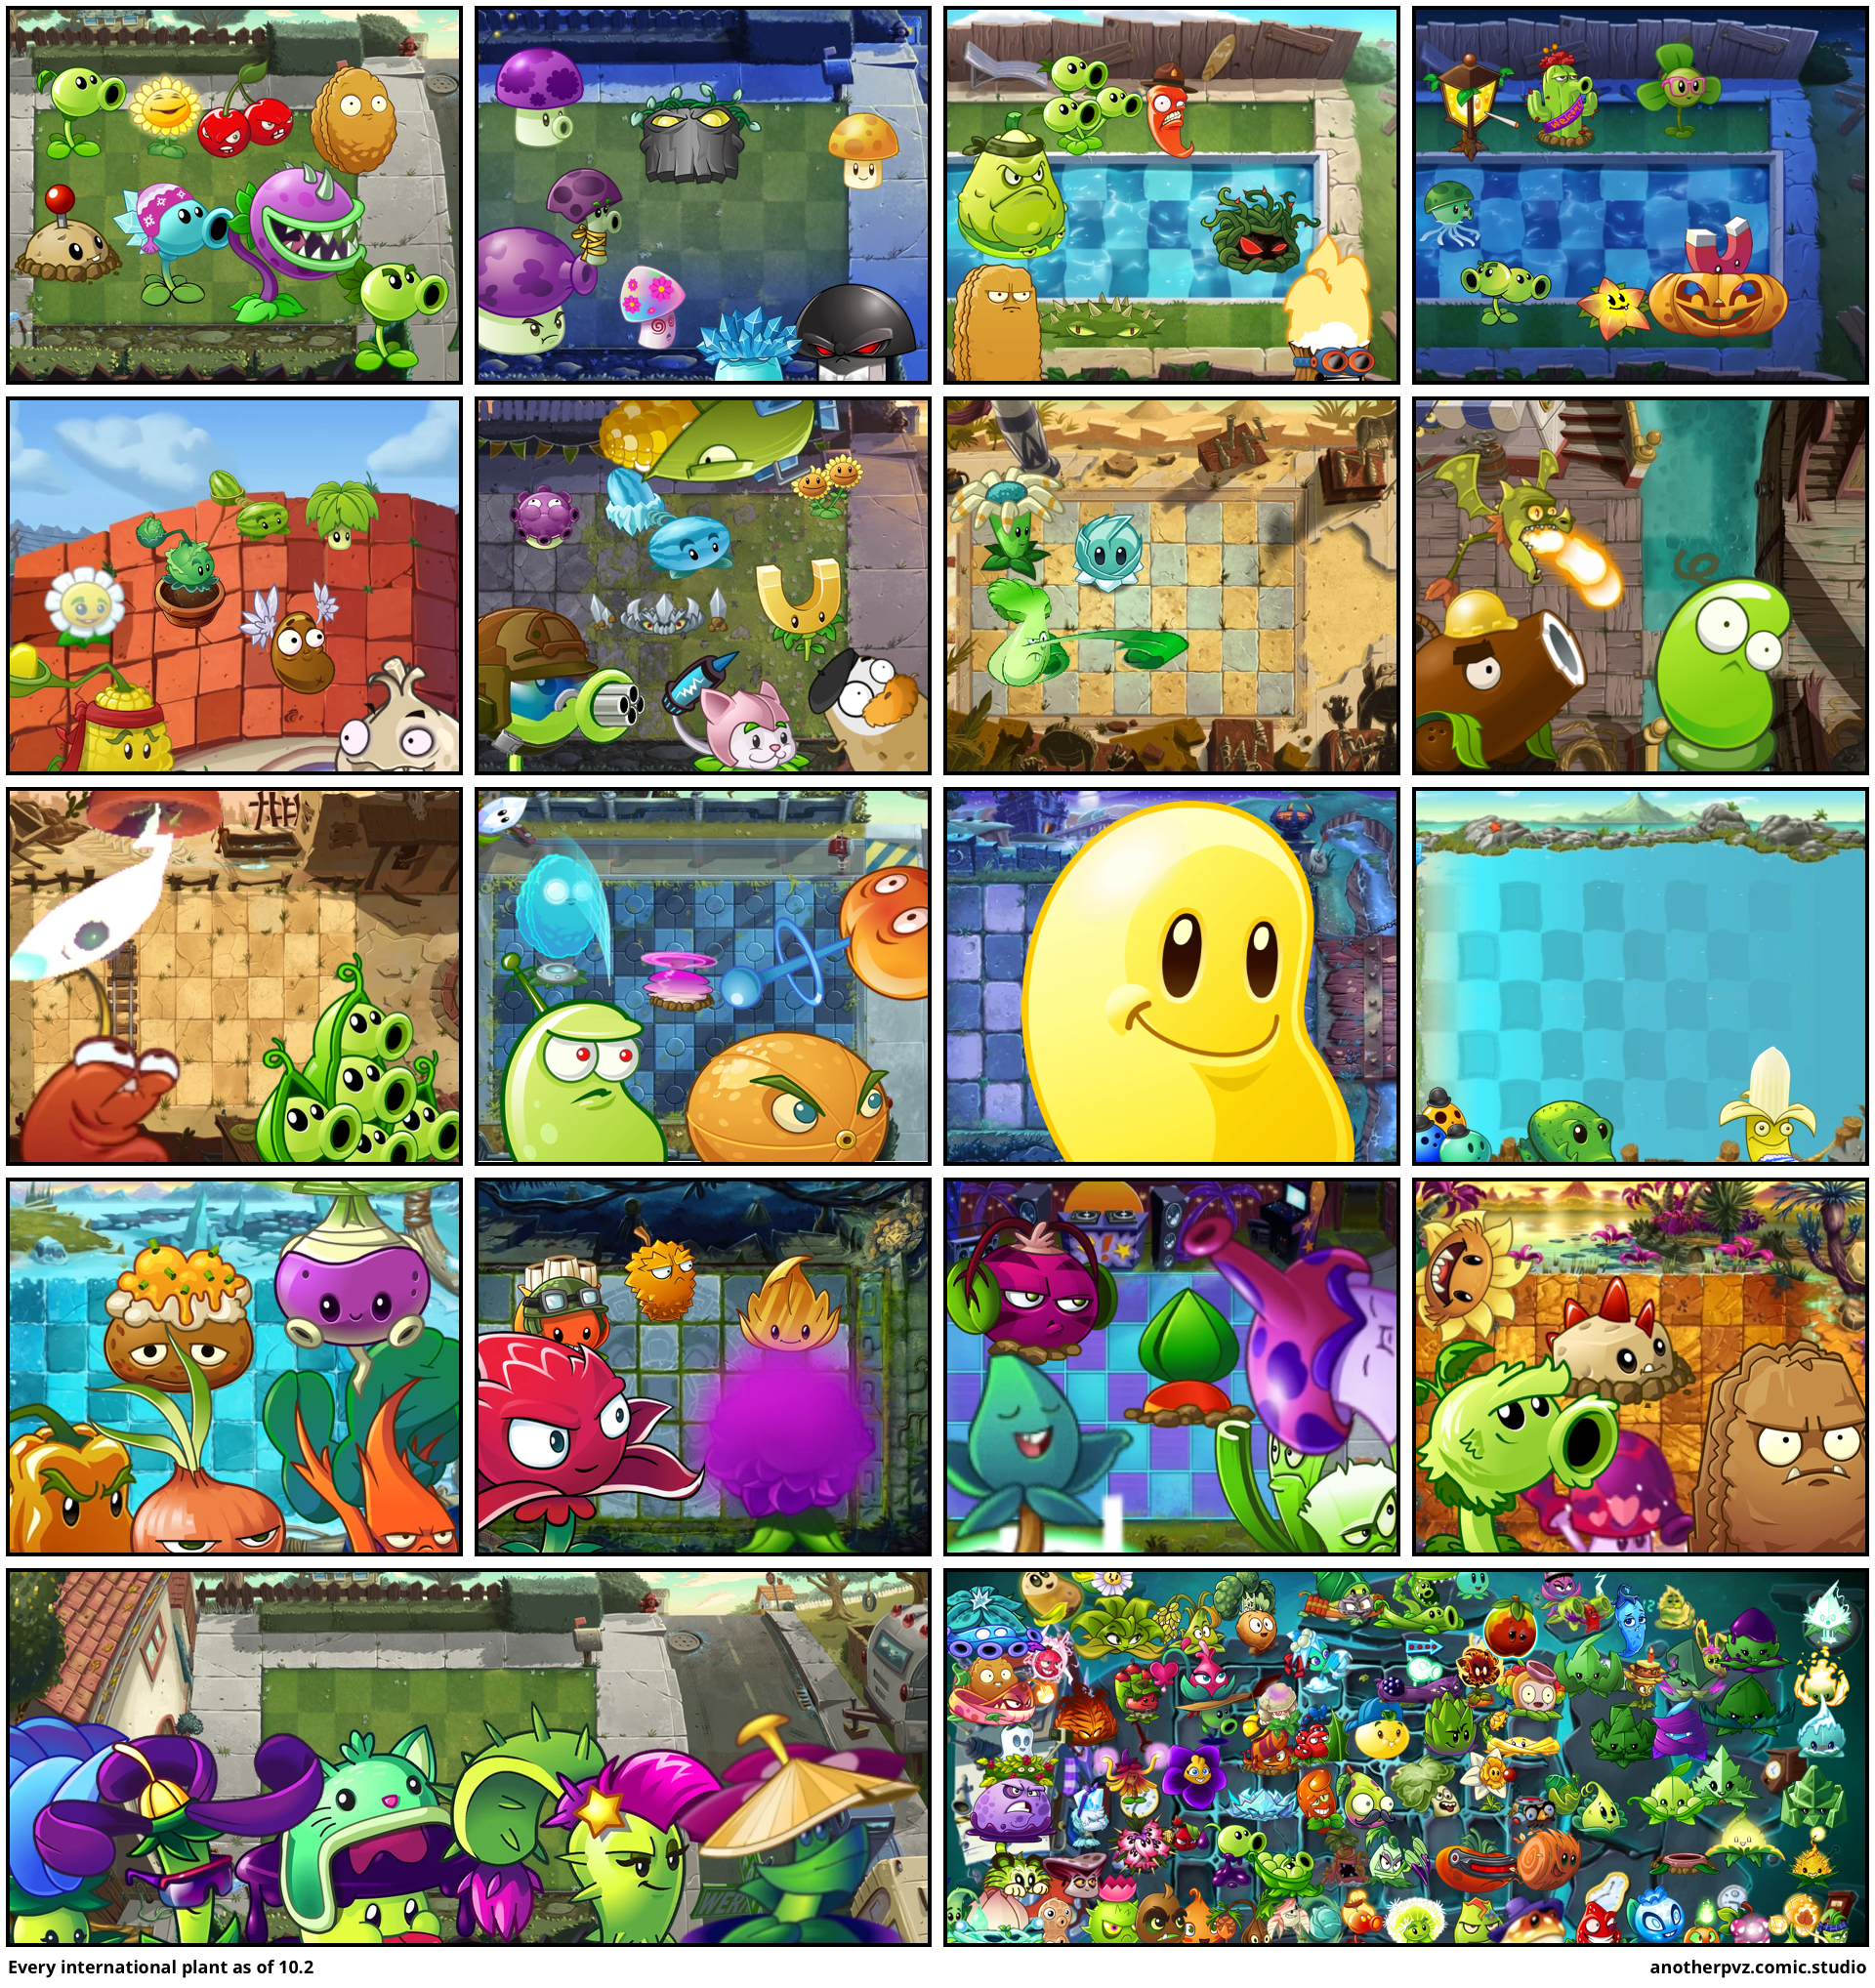 Every international plant as of 10.2